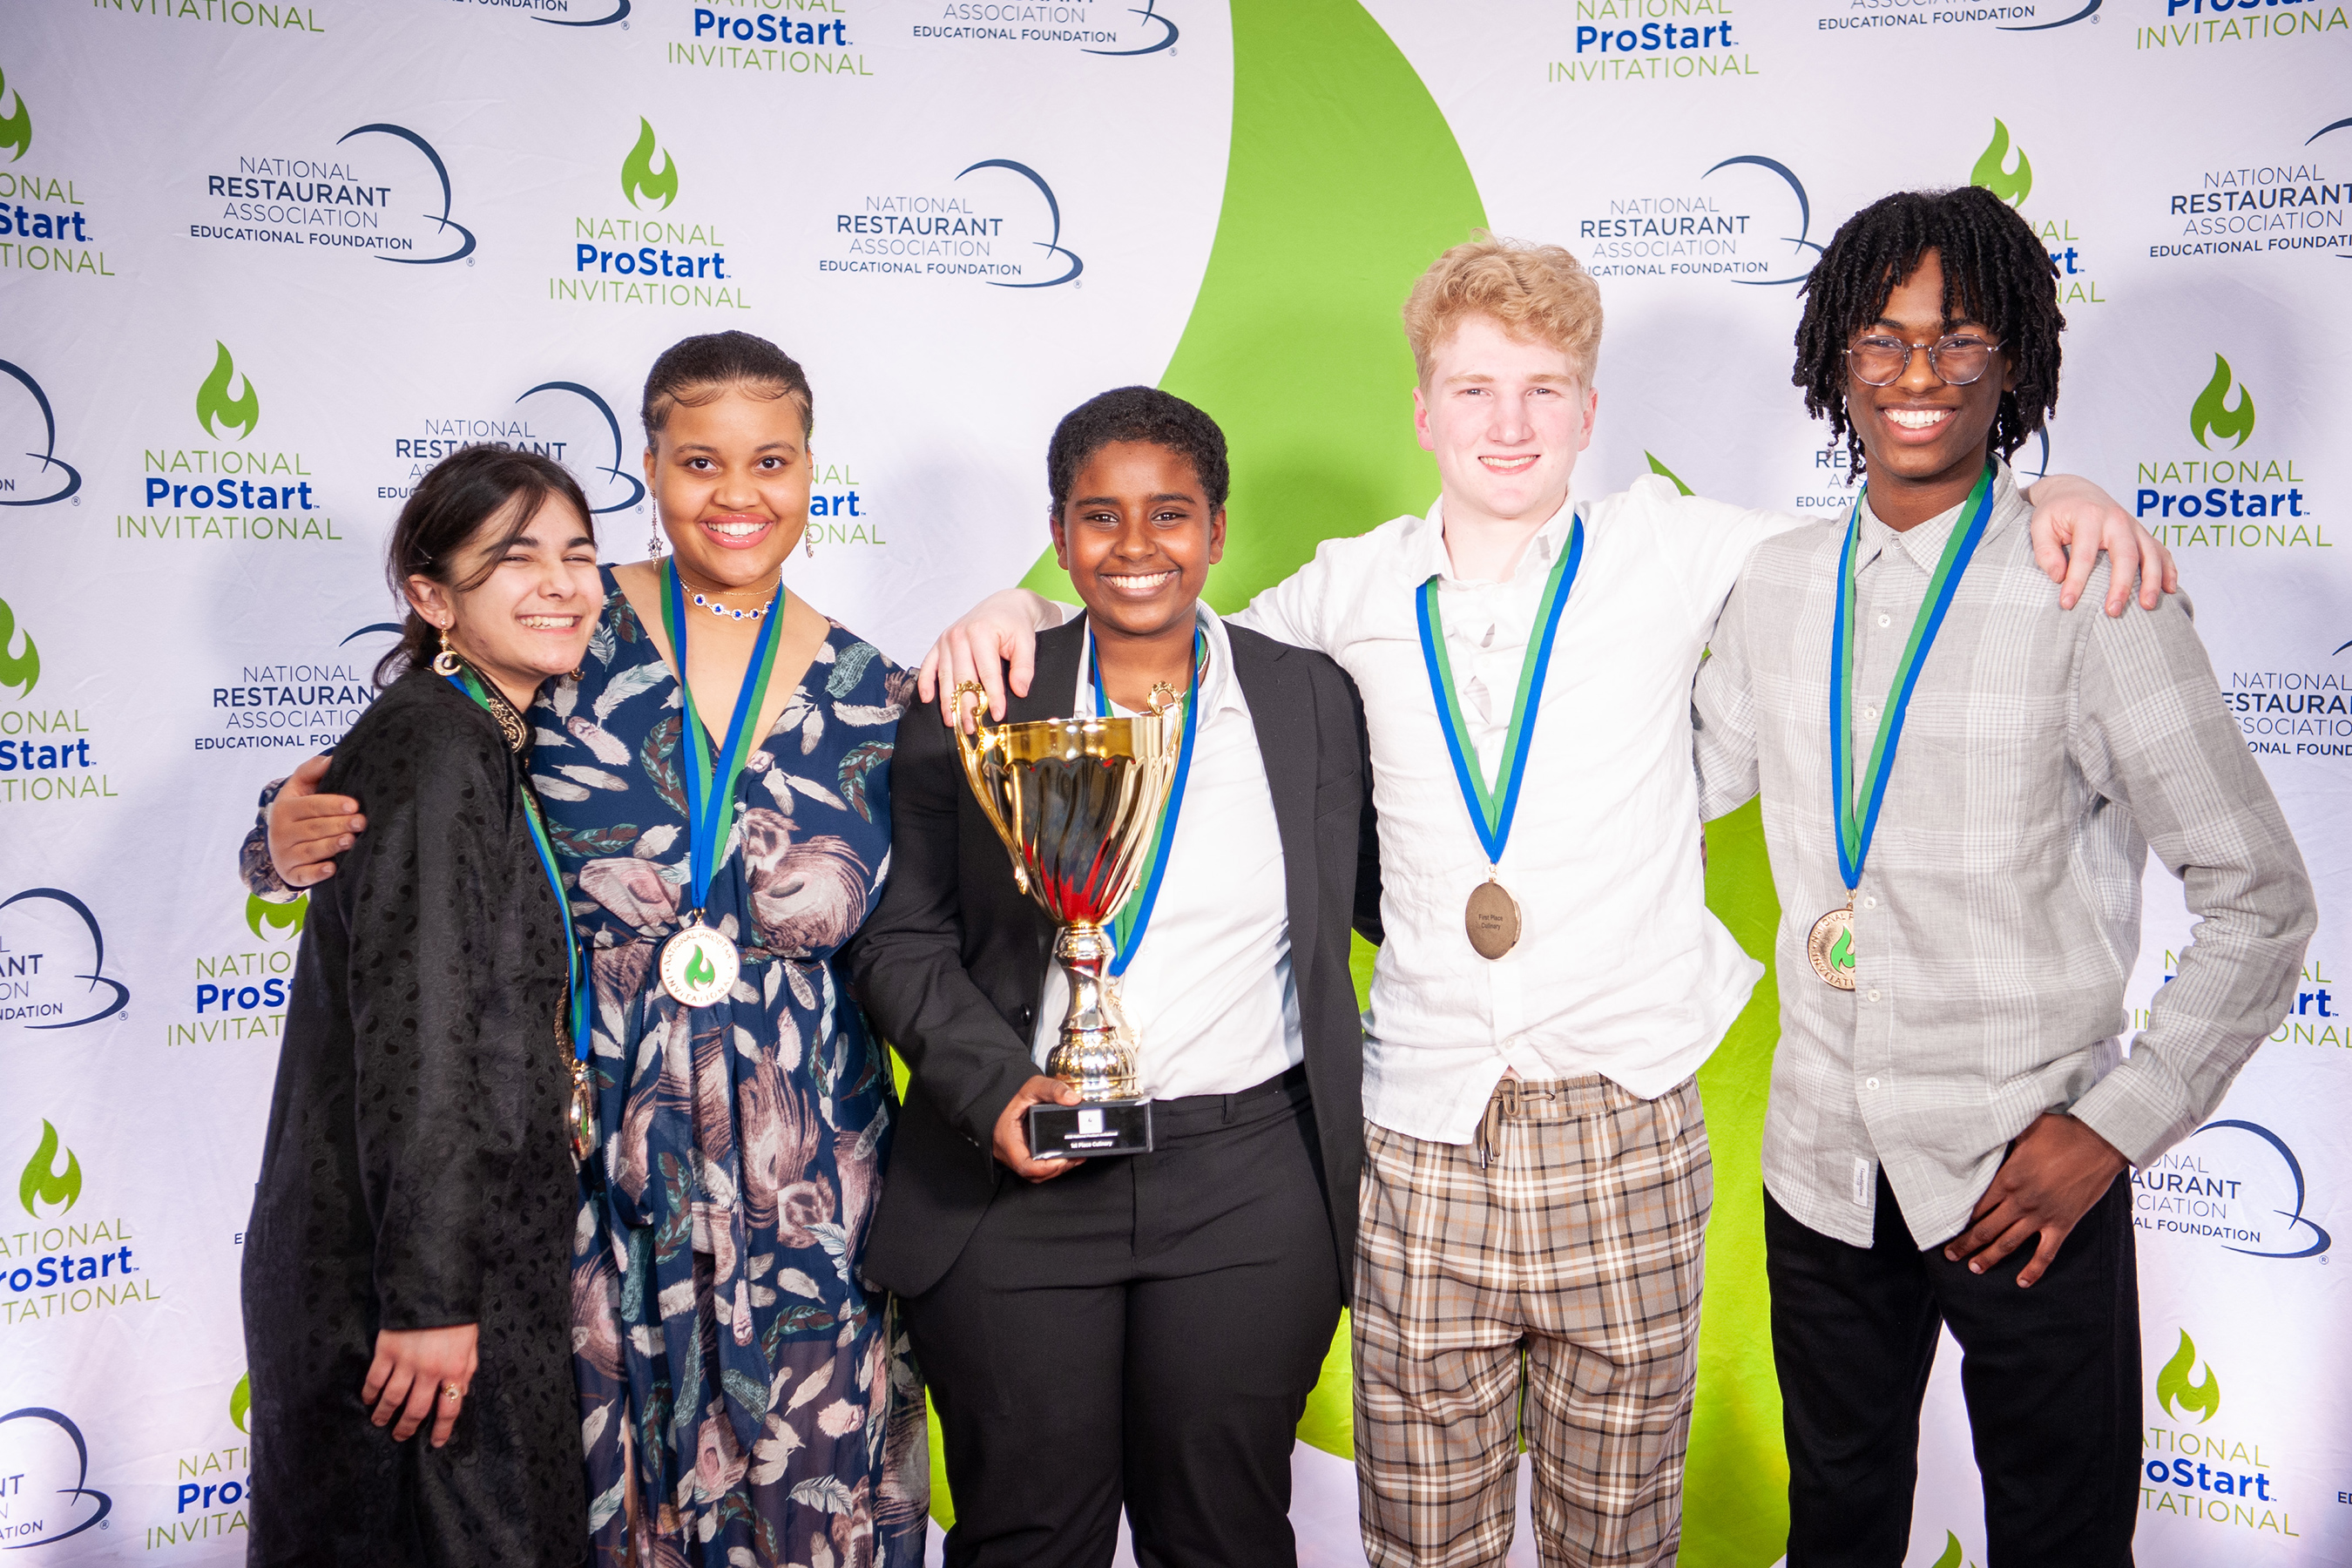 The ProStart team from Plymouth Canton Educational Park in Canton, Michigan, won first place in the National ProStart Invitational culinary competition, facing off against teams from 45 other states. Team members include: Carmen Hensley, Charles Salowich, Mazin Ahmed, Sophie Dorado, and Yamir Garver.